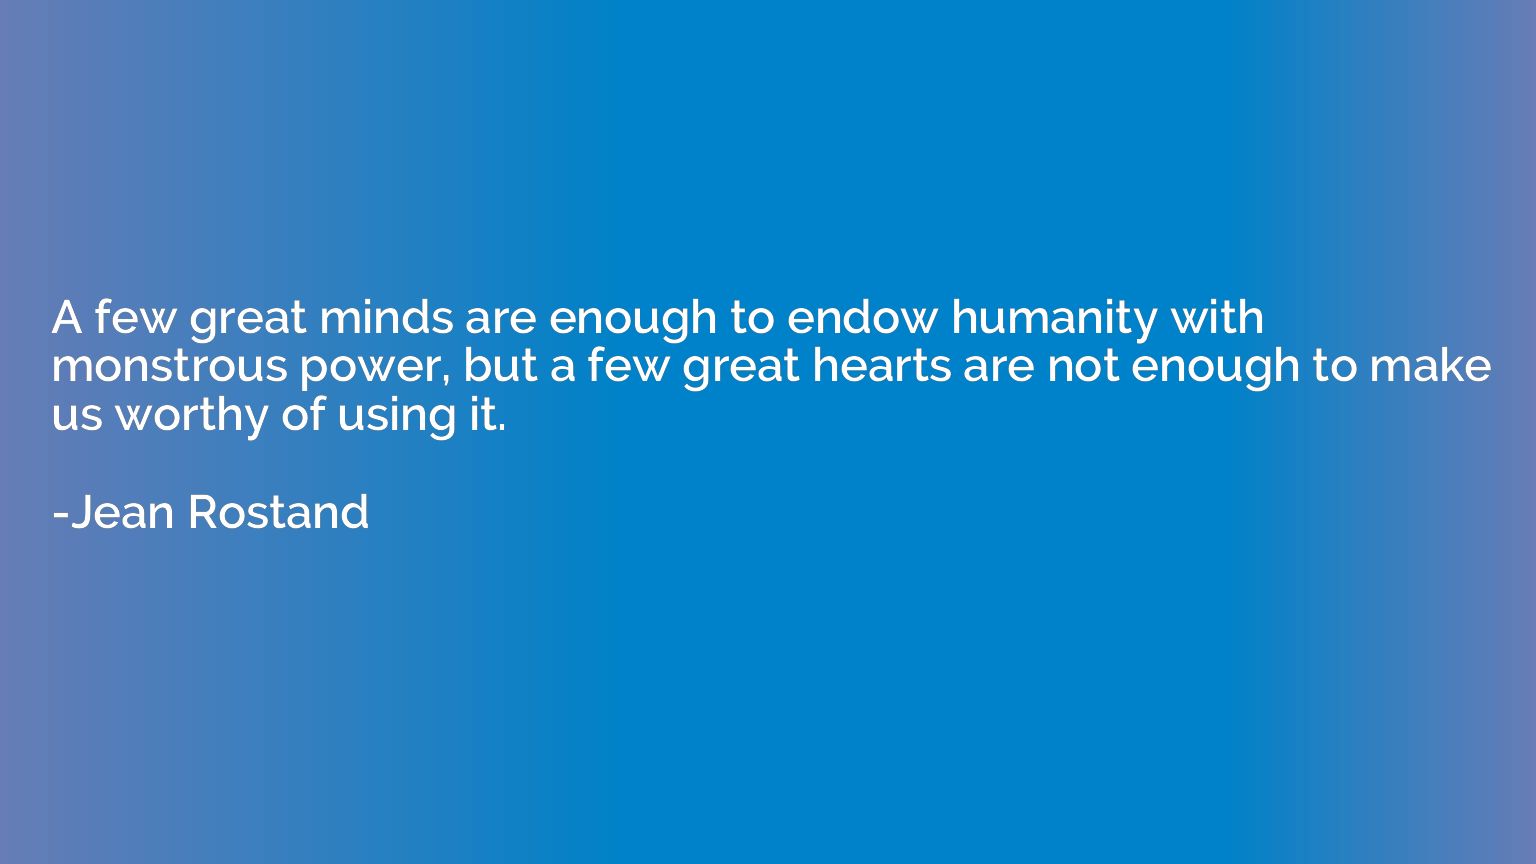 A few great minds are enough to endow humanity with monstrou